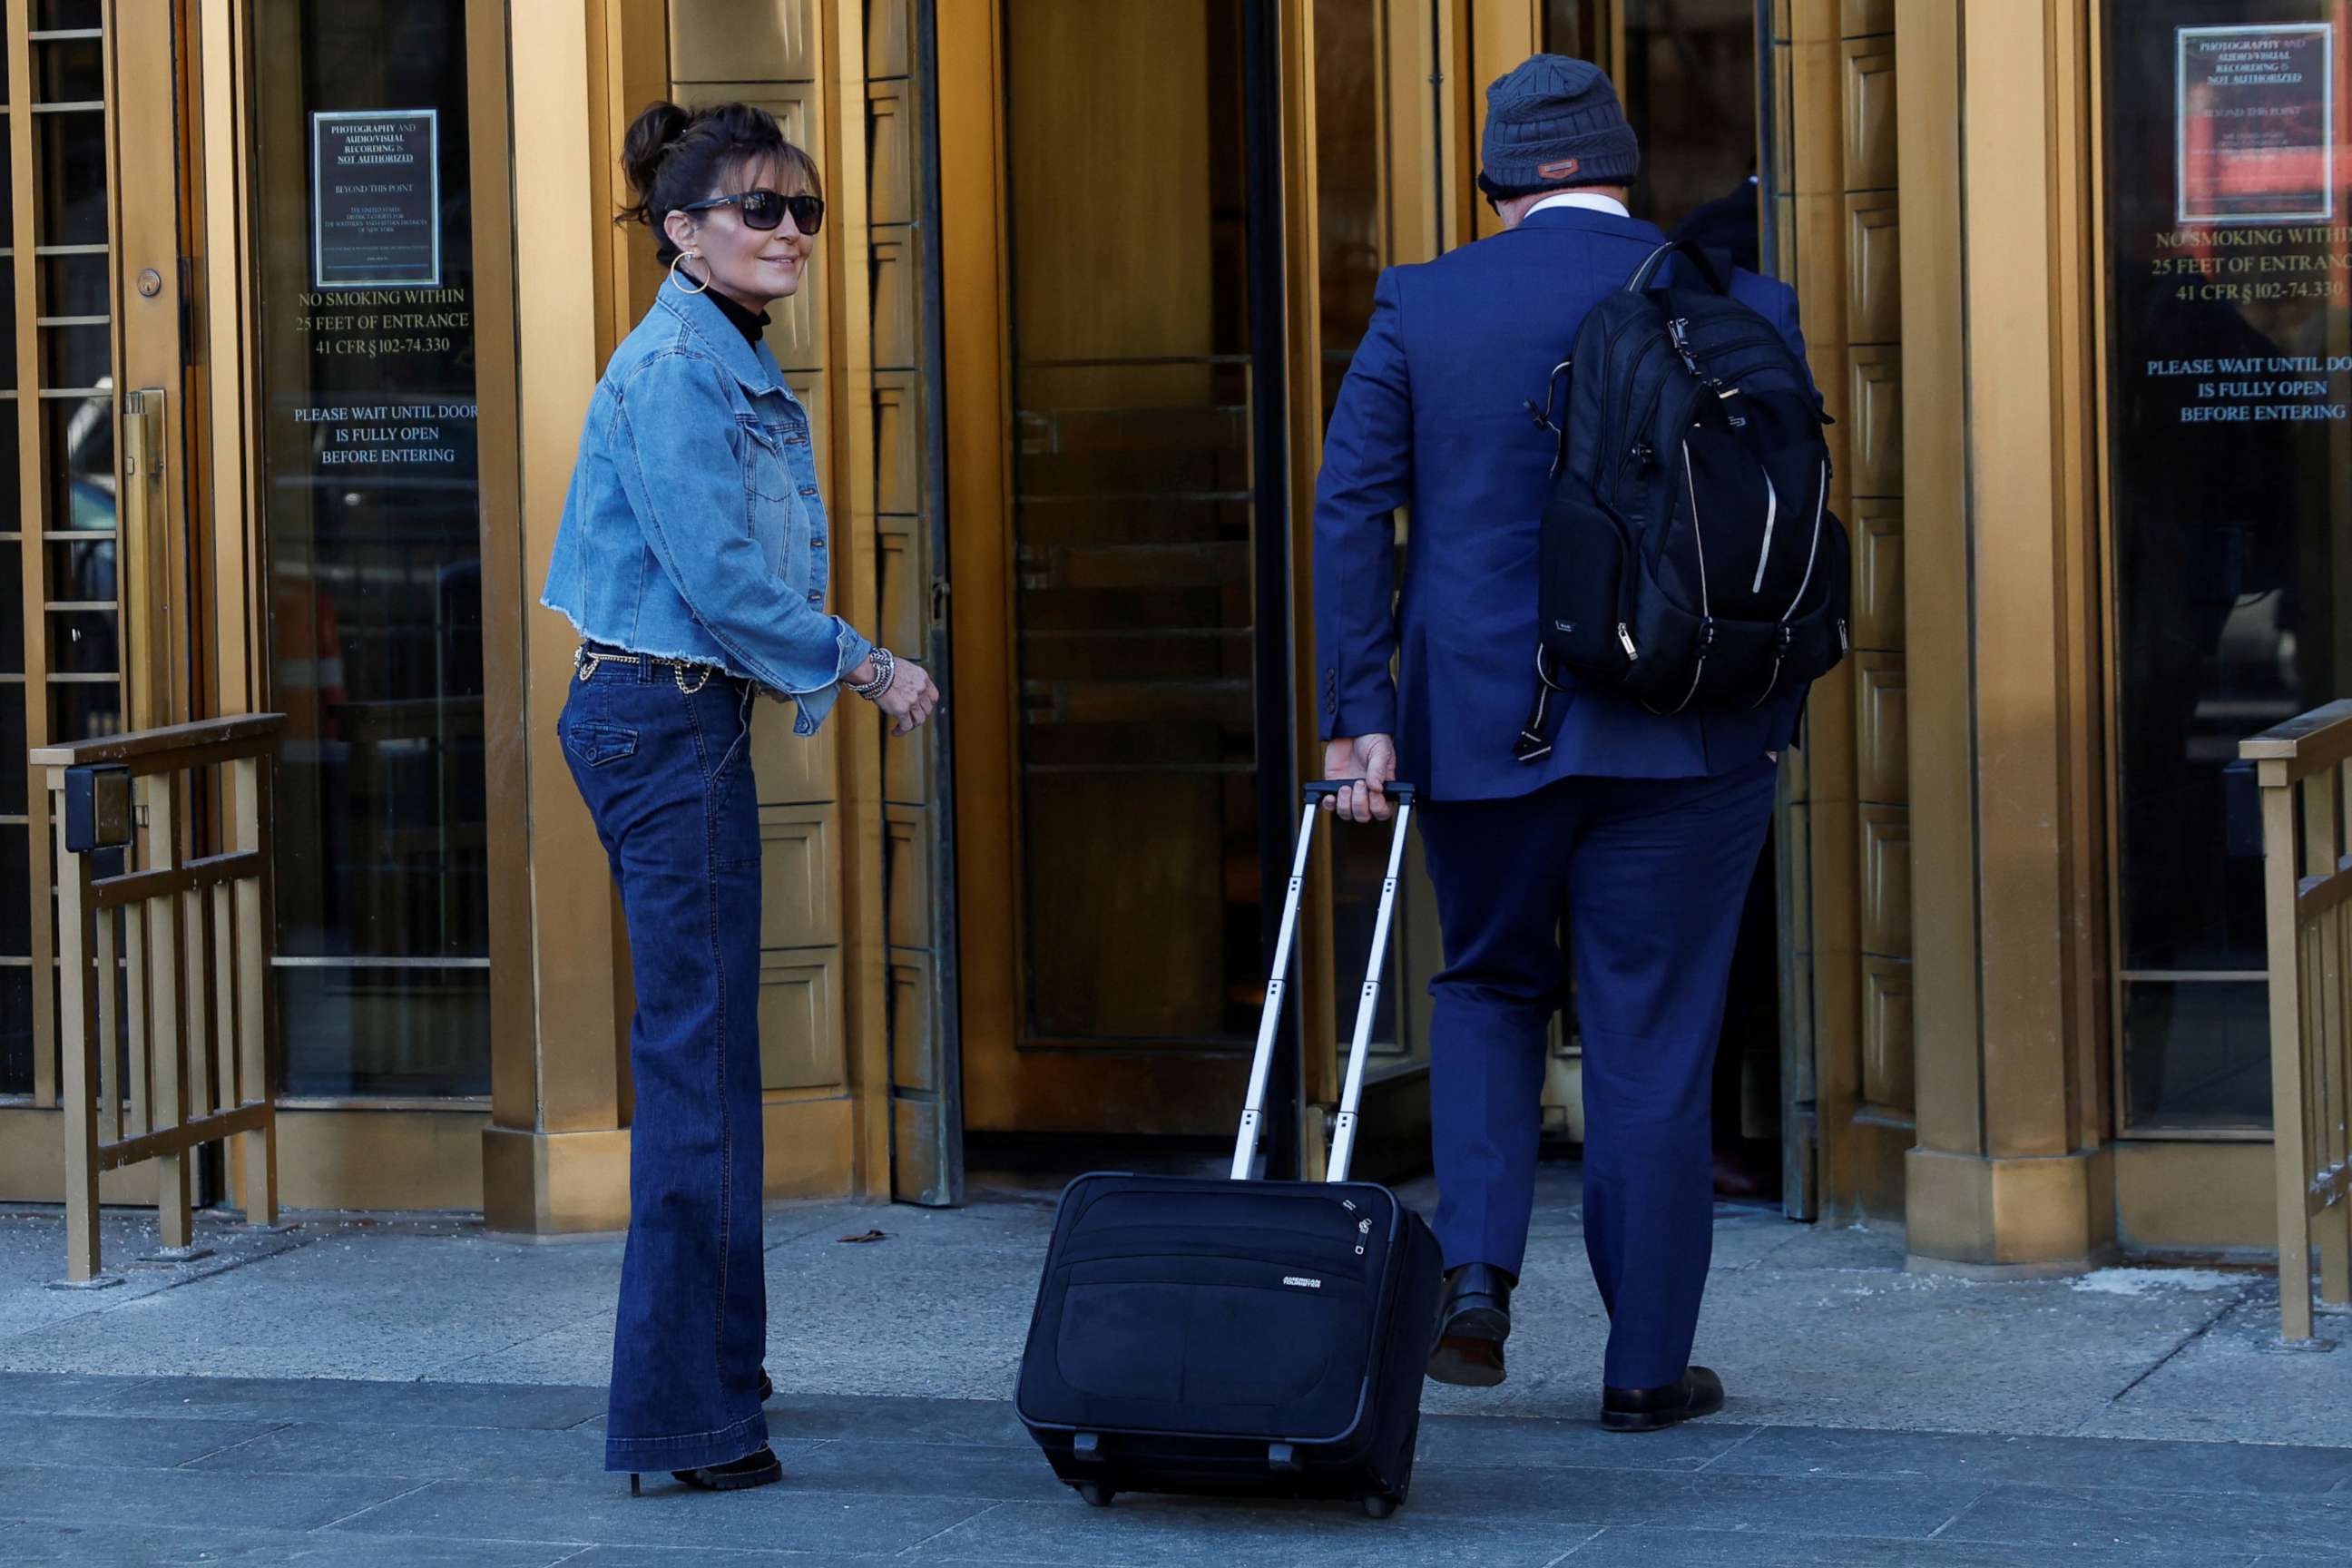 PHOTO: Sarah Palin, 2008 Republican vice presidential candidate and former Alaska governor, arrives for her defamation lawsuit against the New York Times, at the United States Courthouse in the Manhattan, Feb. 15, 2022.